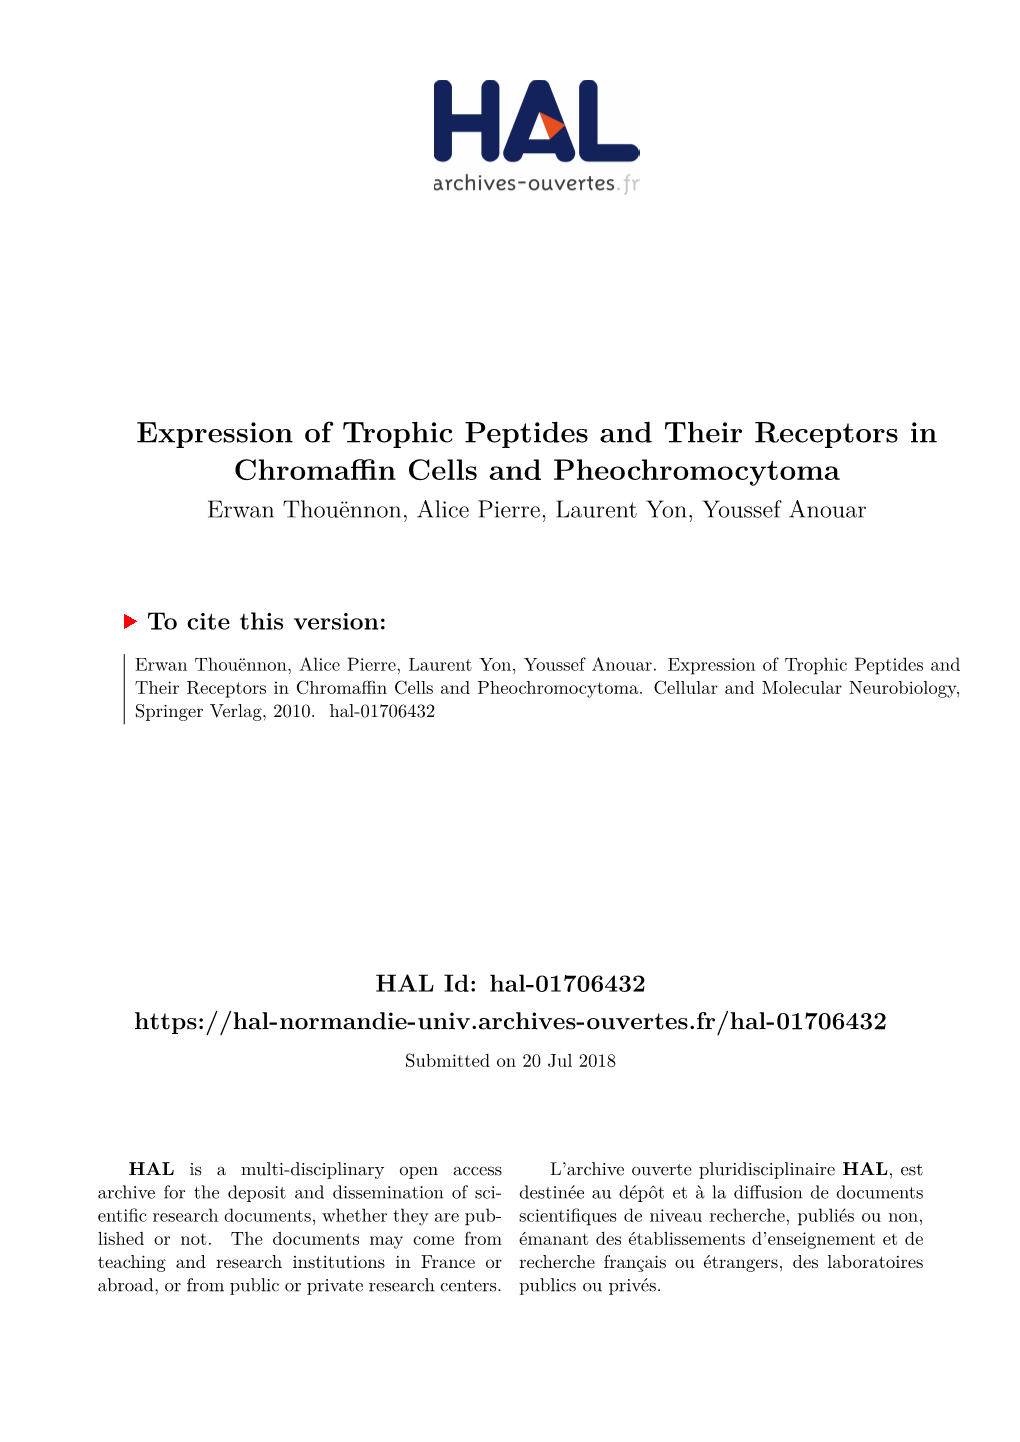 Expression of Trophic Peptides and Their Receptors in Chromaffin Cells